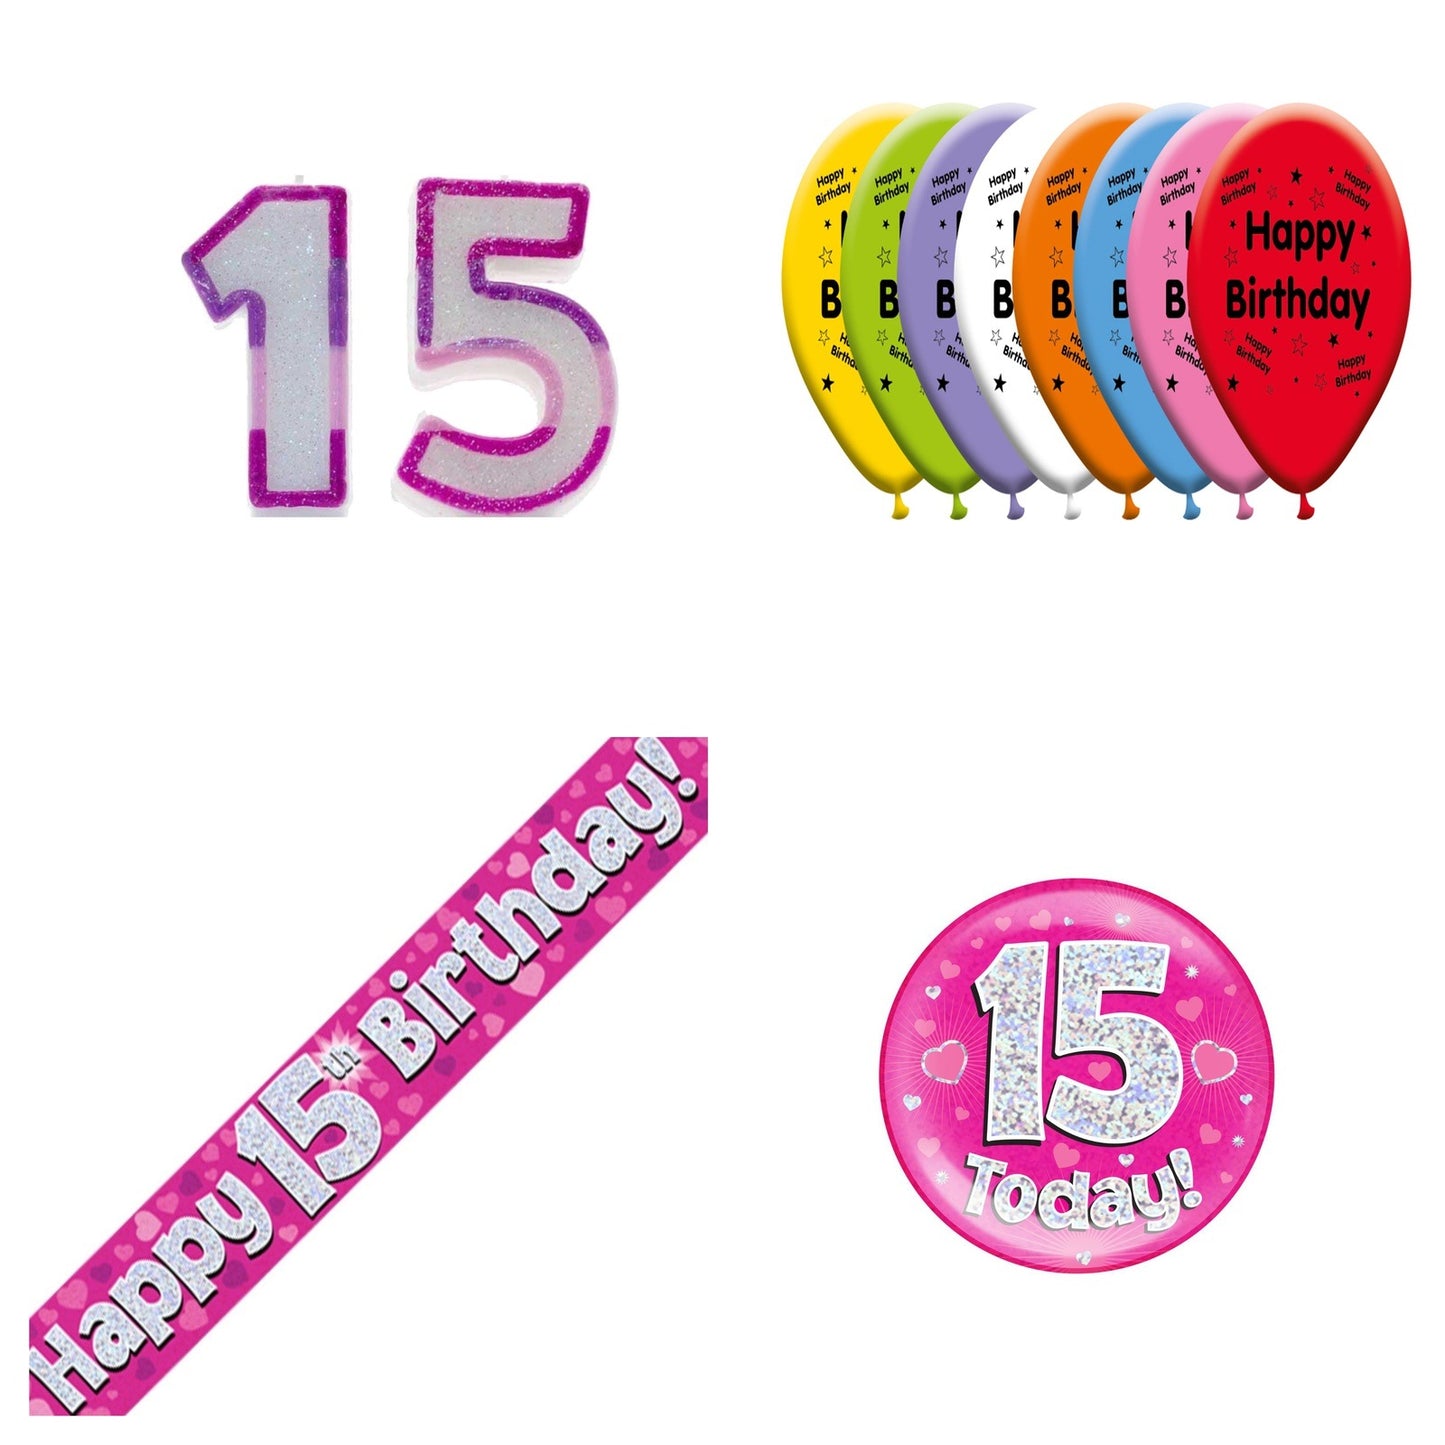 Pink Hearts Bundle B Banner, Balloons, Candle, Badge Ages 1 to 90